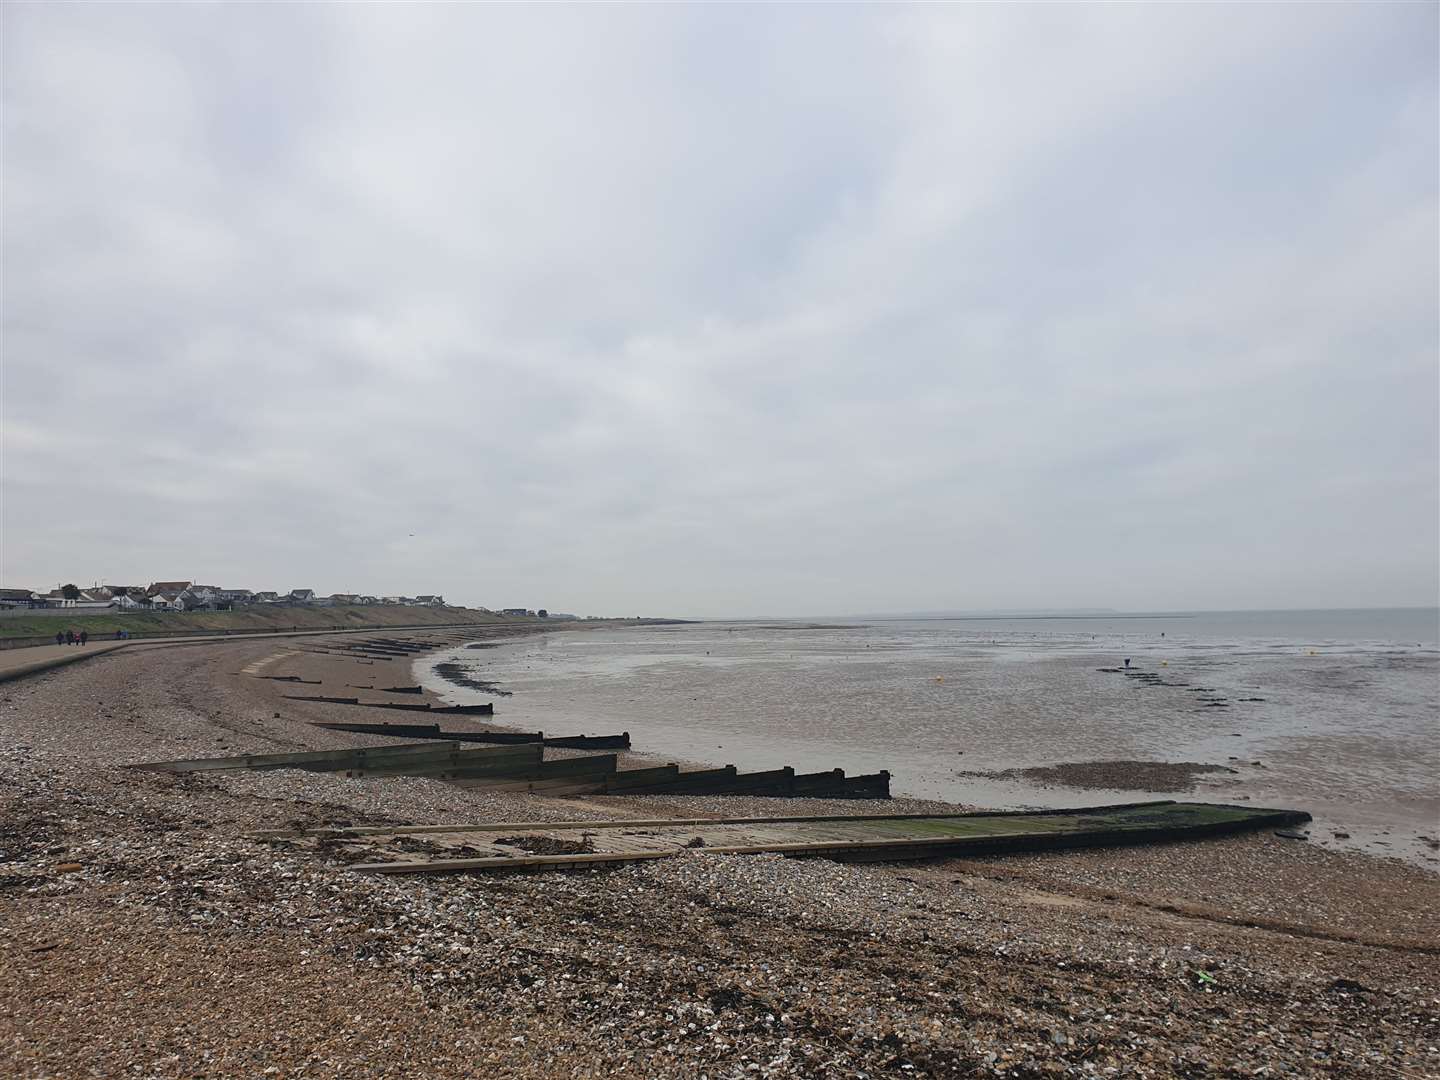 The views across the sea at Hampton, Herne Bay, near the public toilets